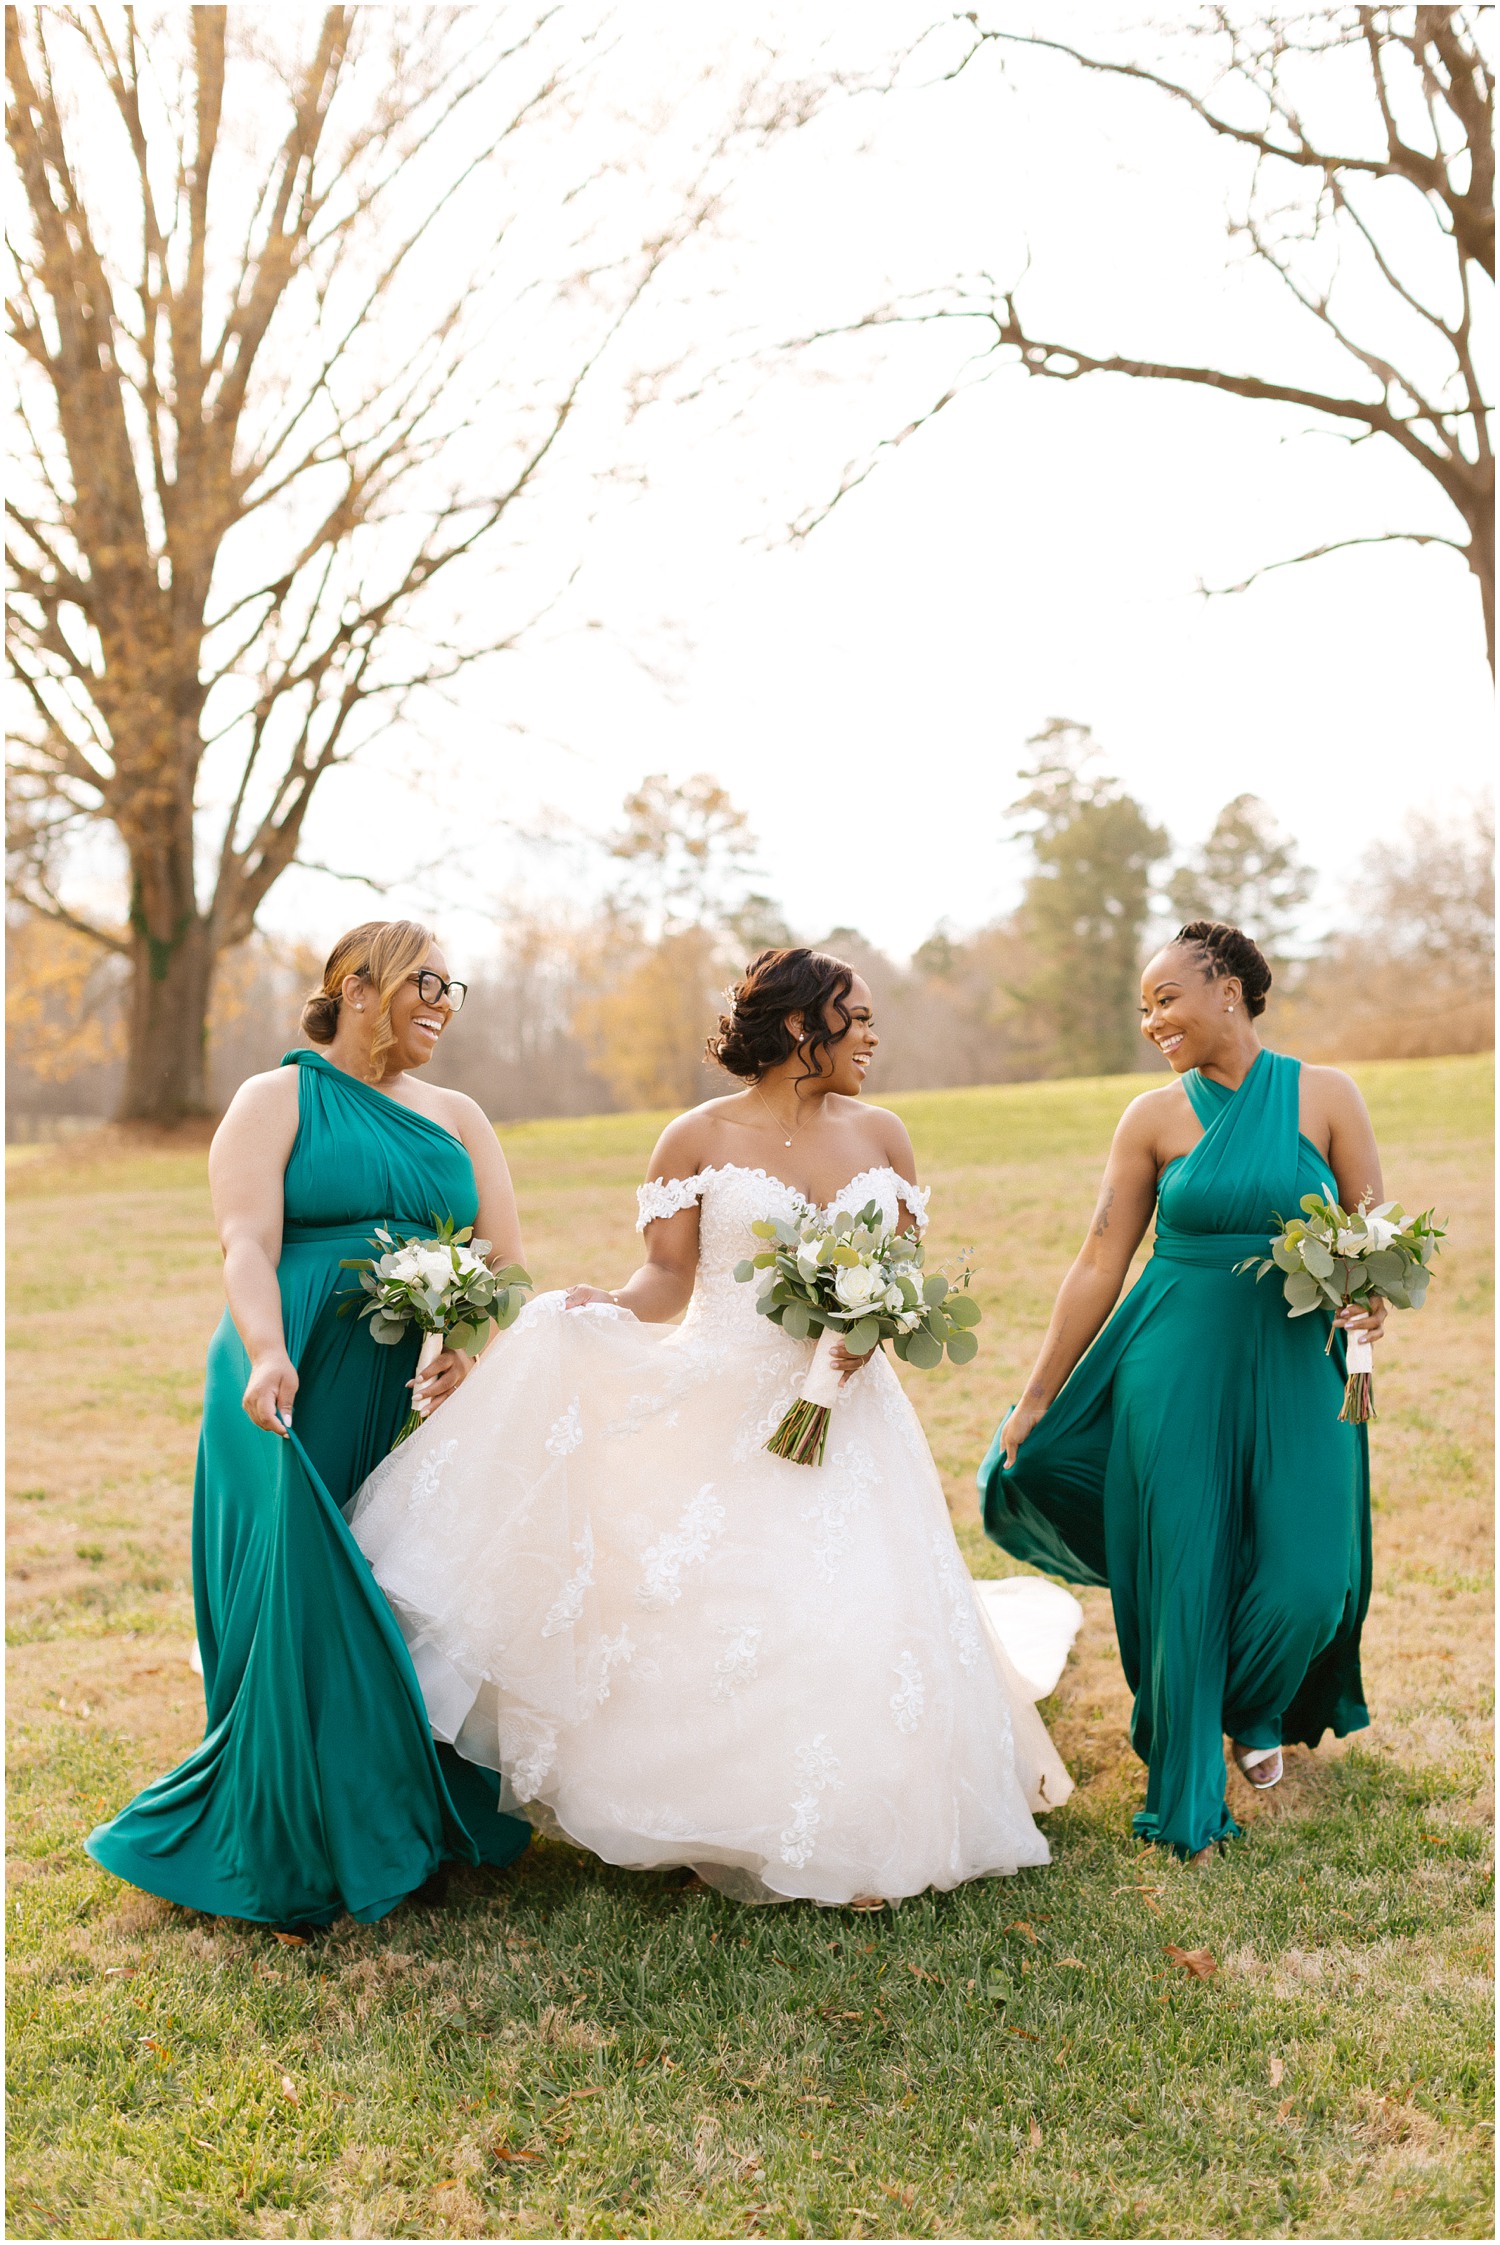 Bride and her friends walking together at The Barn at Valhalla.